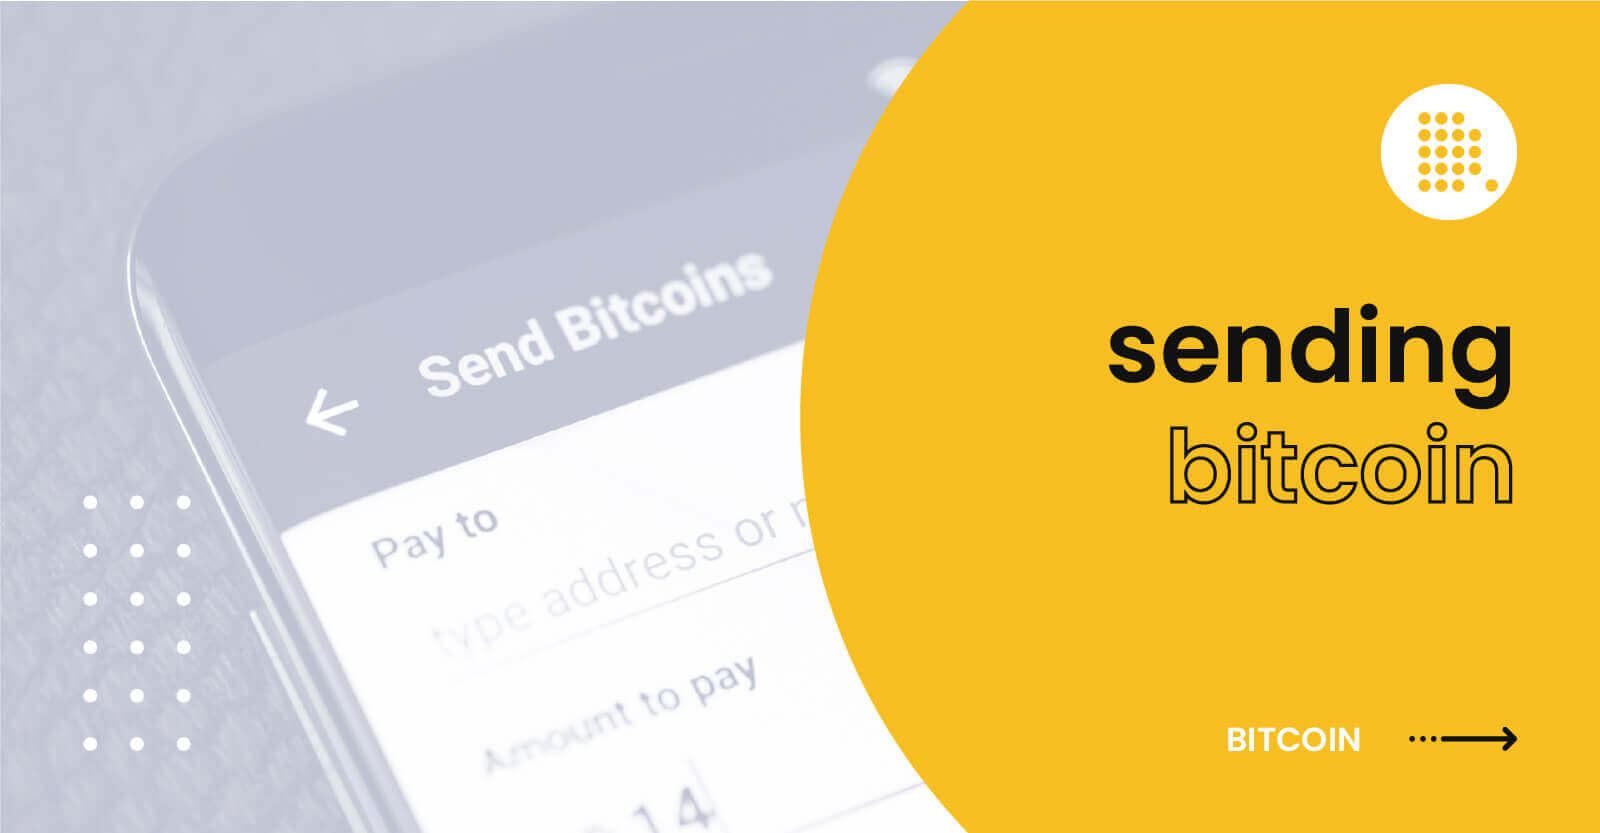 How to send bitcoin to an address